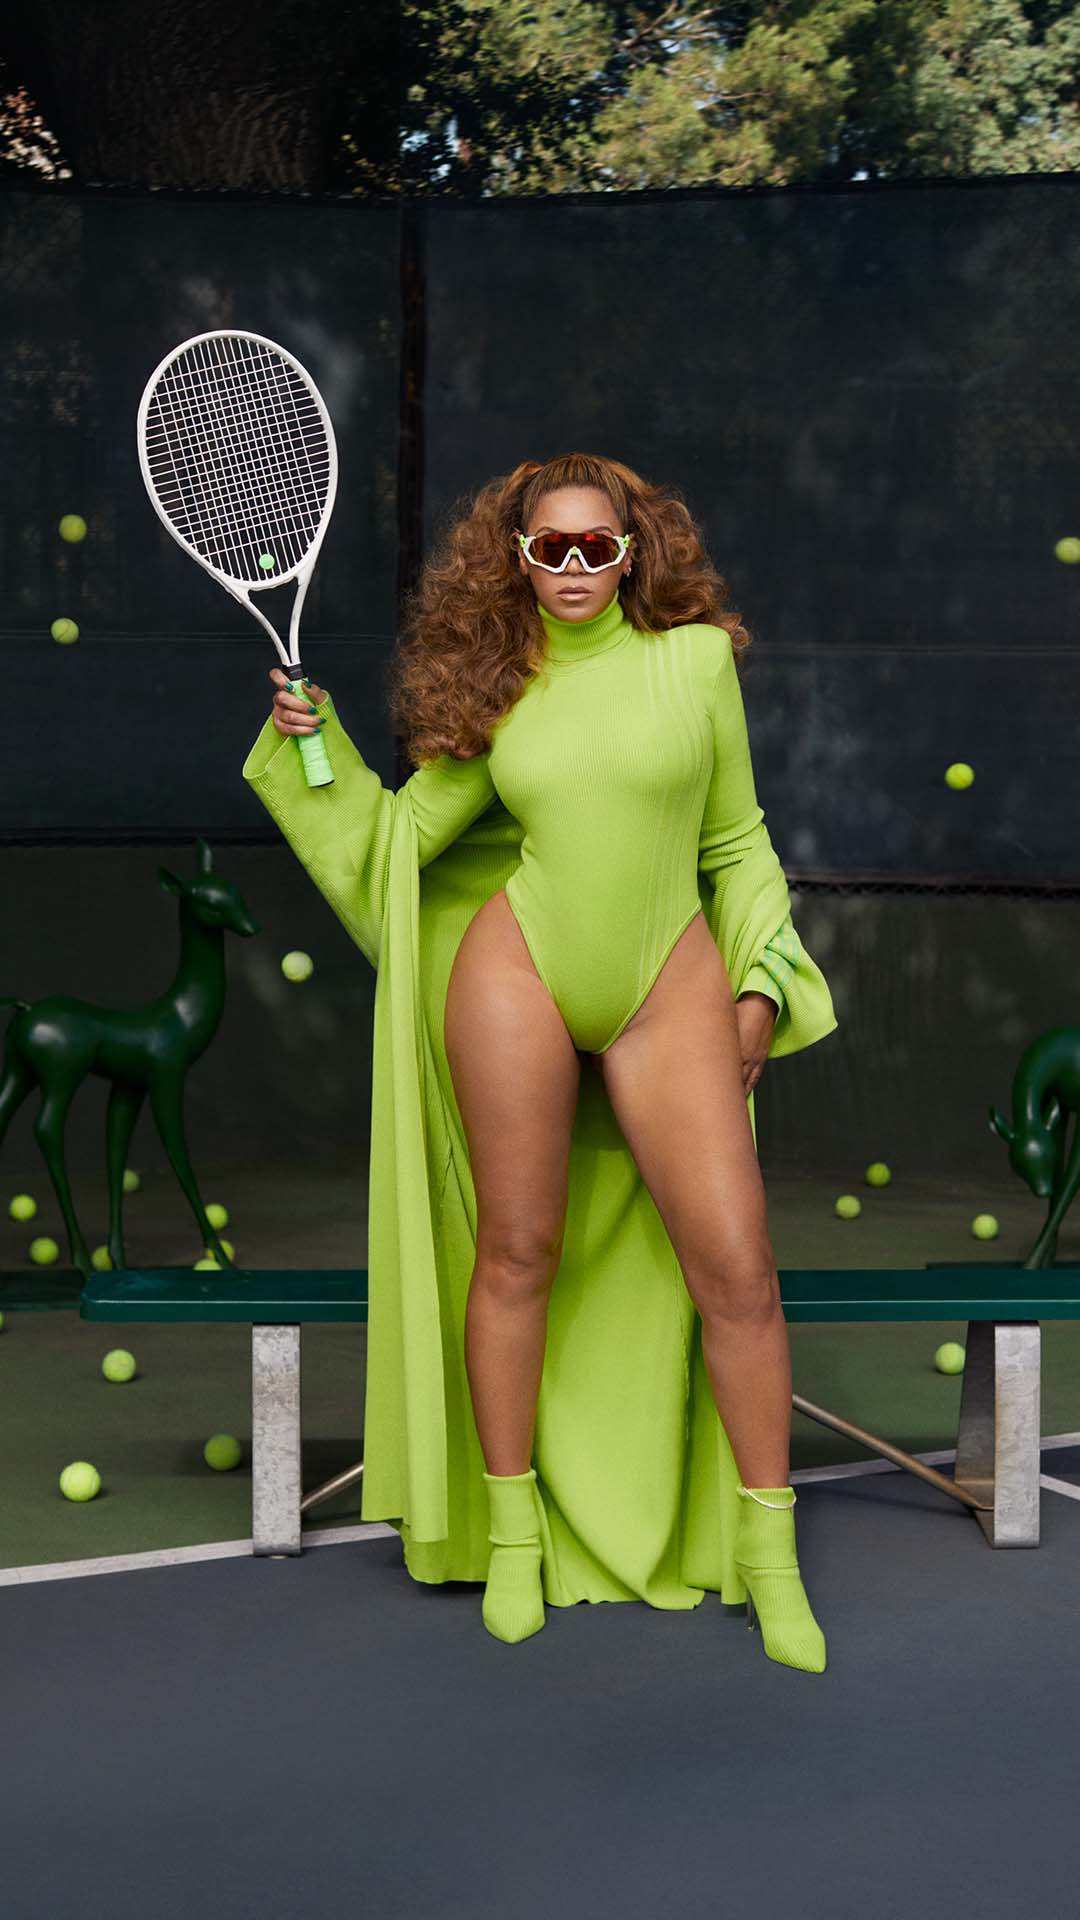 beyonce posing with tennis racket on tennis court